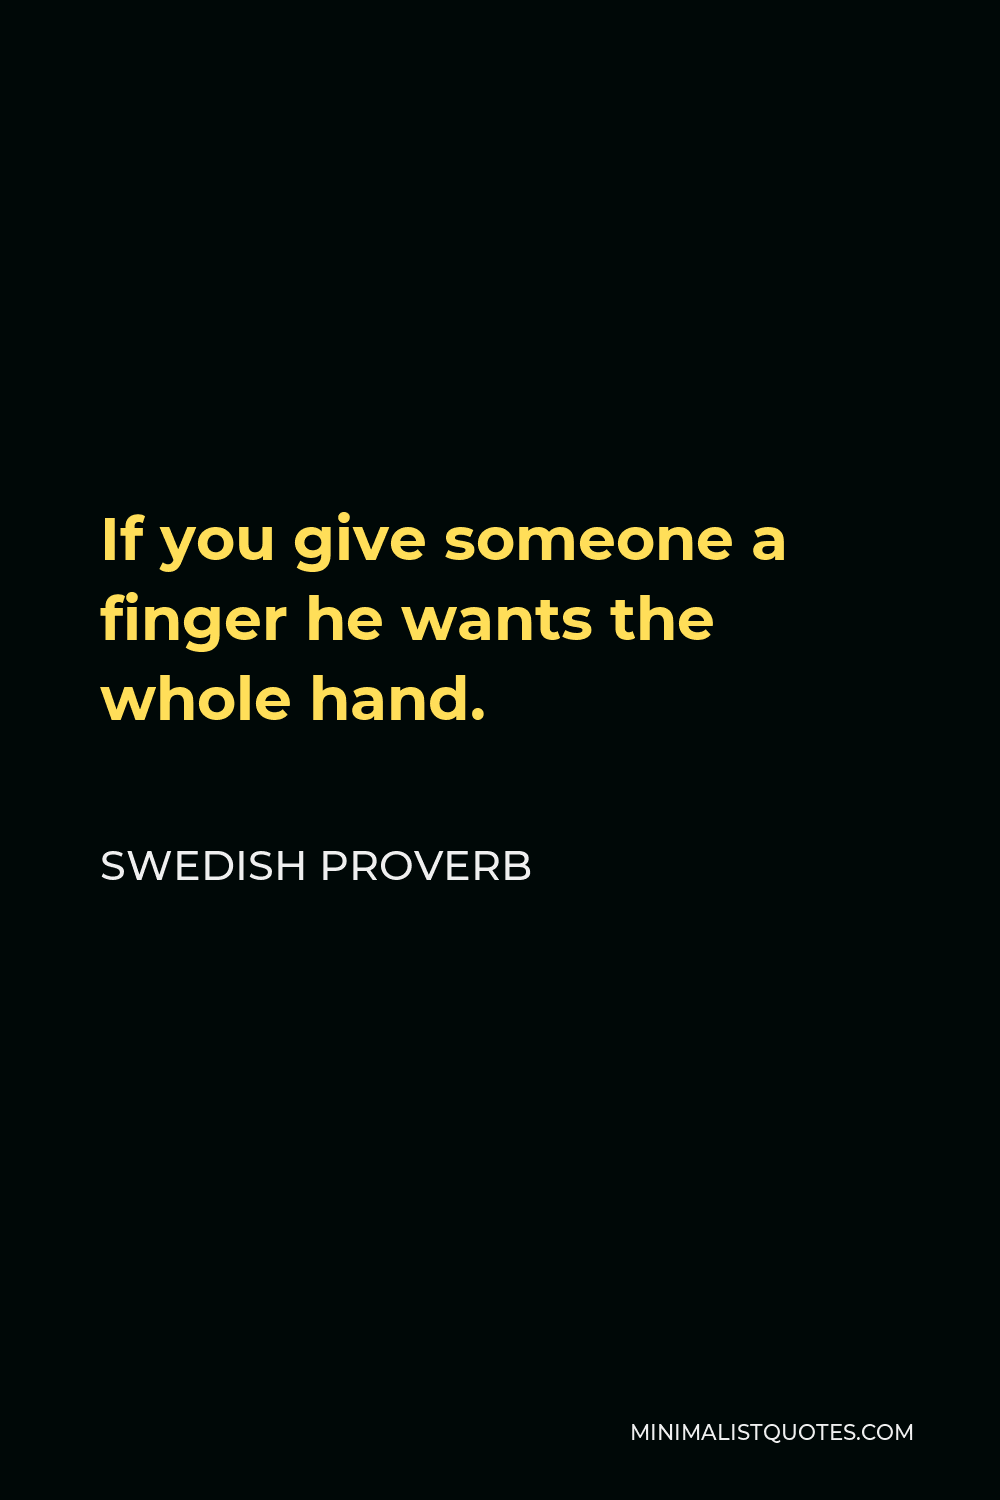 Swedish Proverb Quote - If you give someone a finger he wants the whole hand.